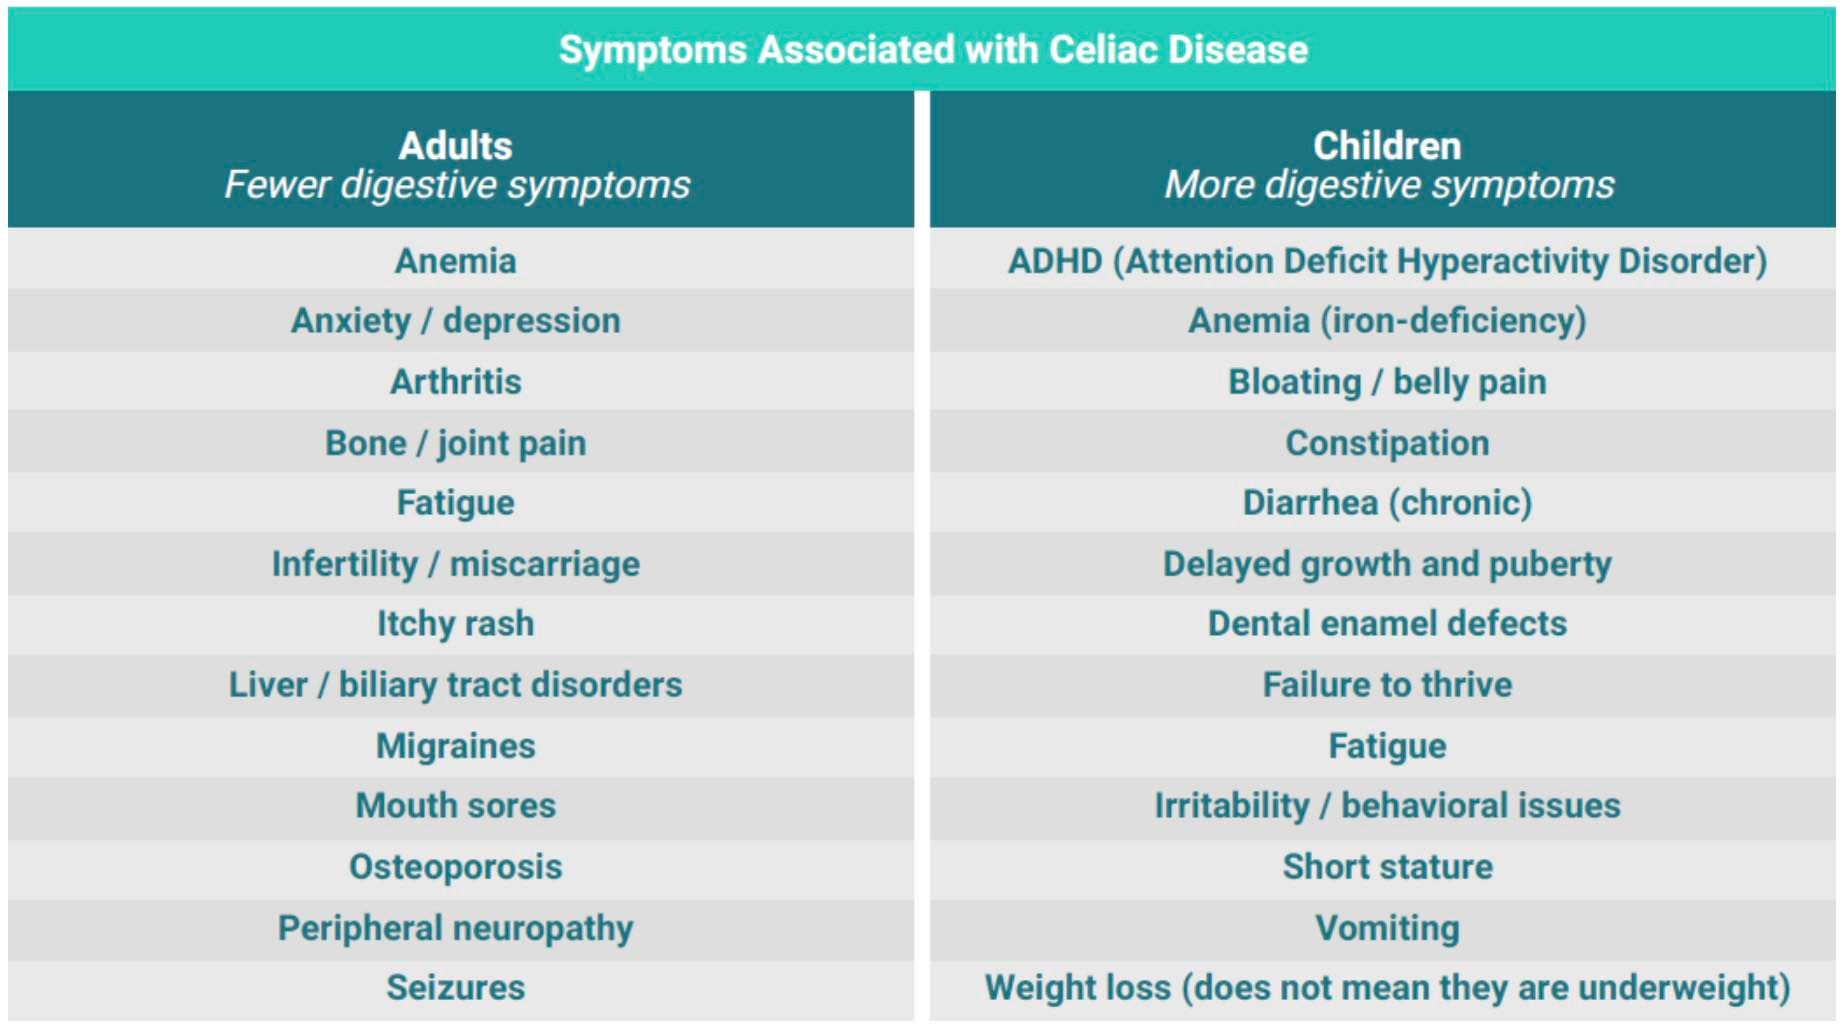 symptoms associated with celiac disease for adults and children.jpg